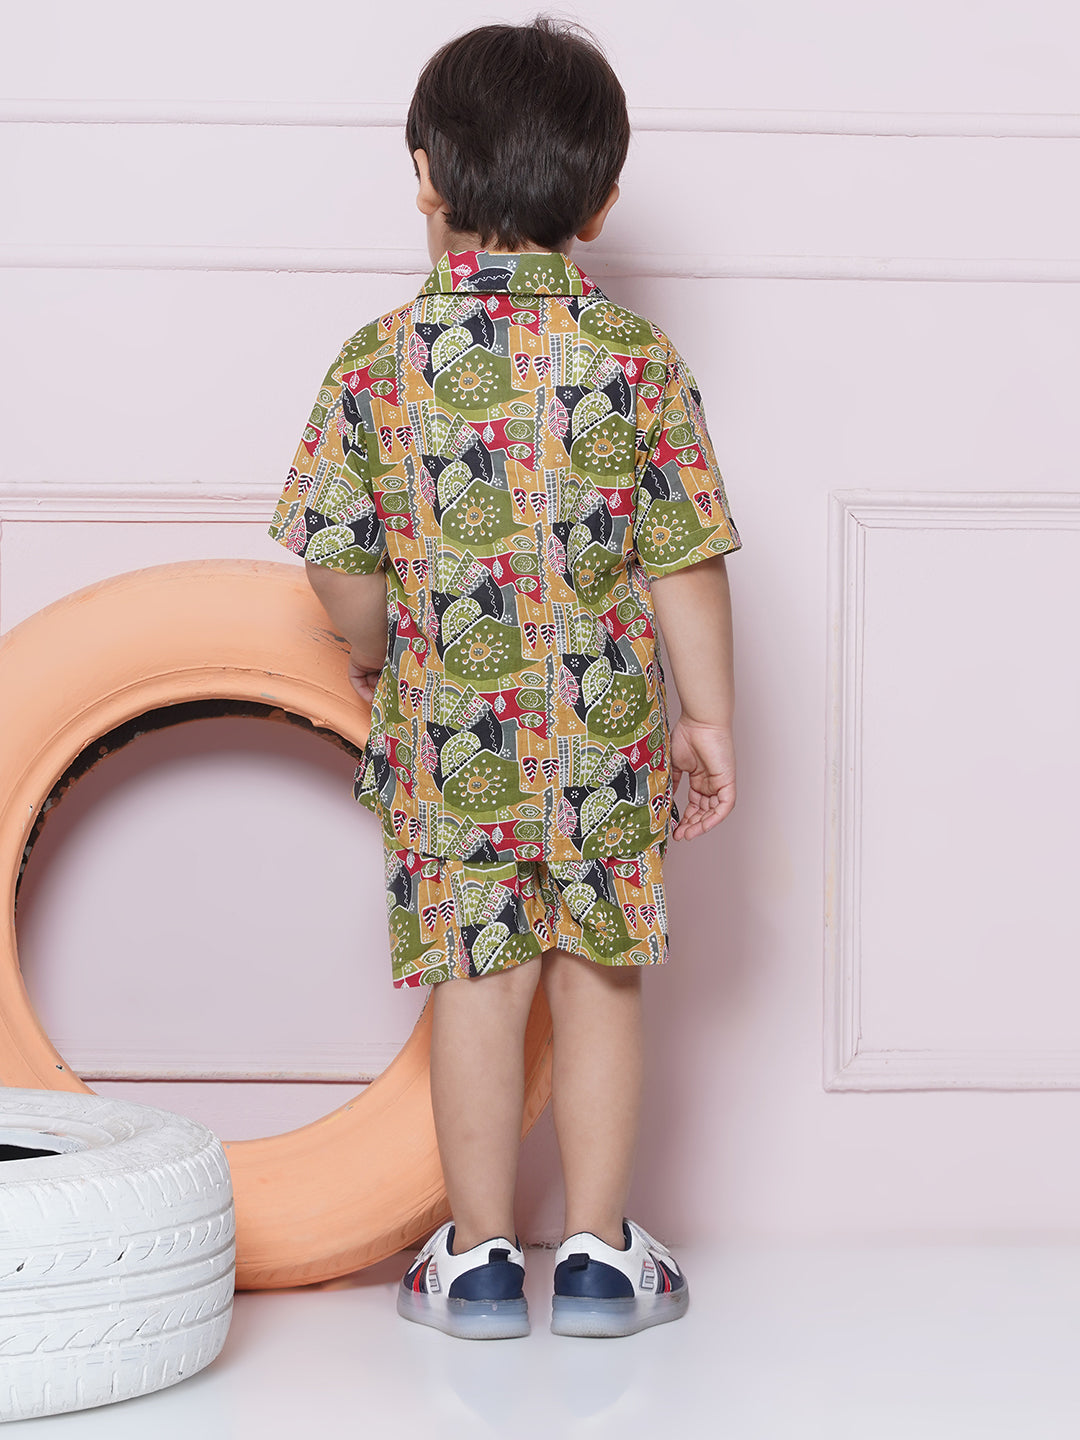 Green Cotton Shirt & shorts Half Sleeves with Collar and Printed CO-ORDS Set for Boys